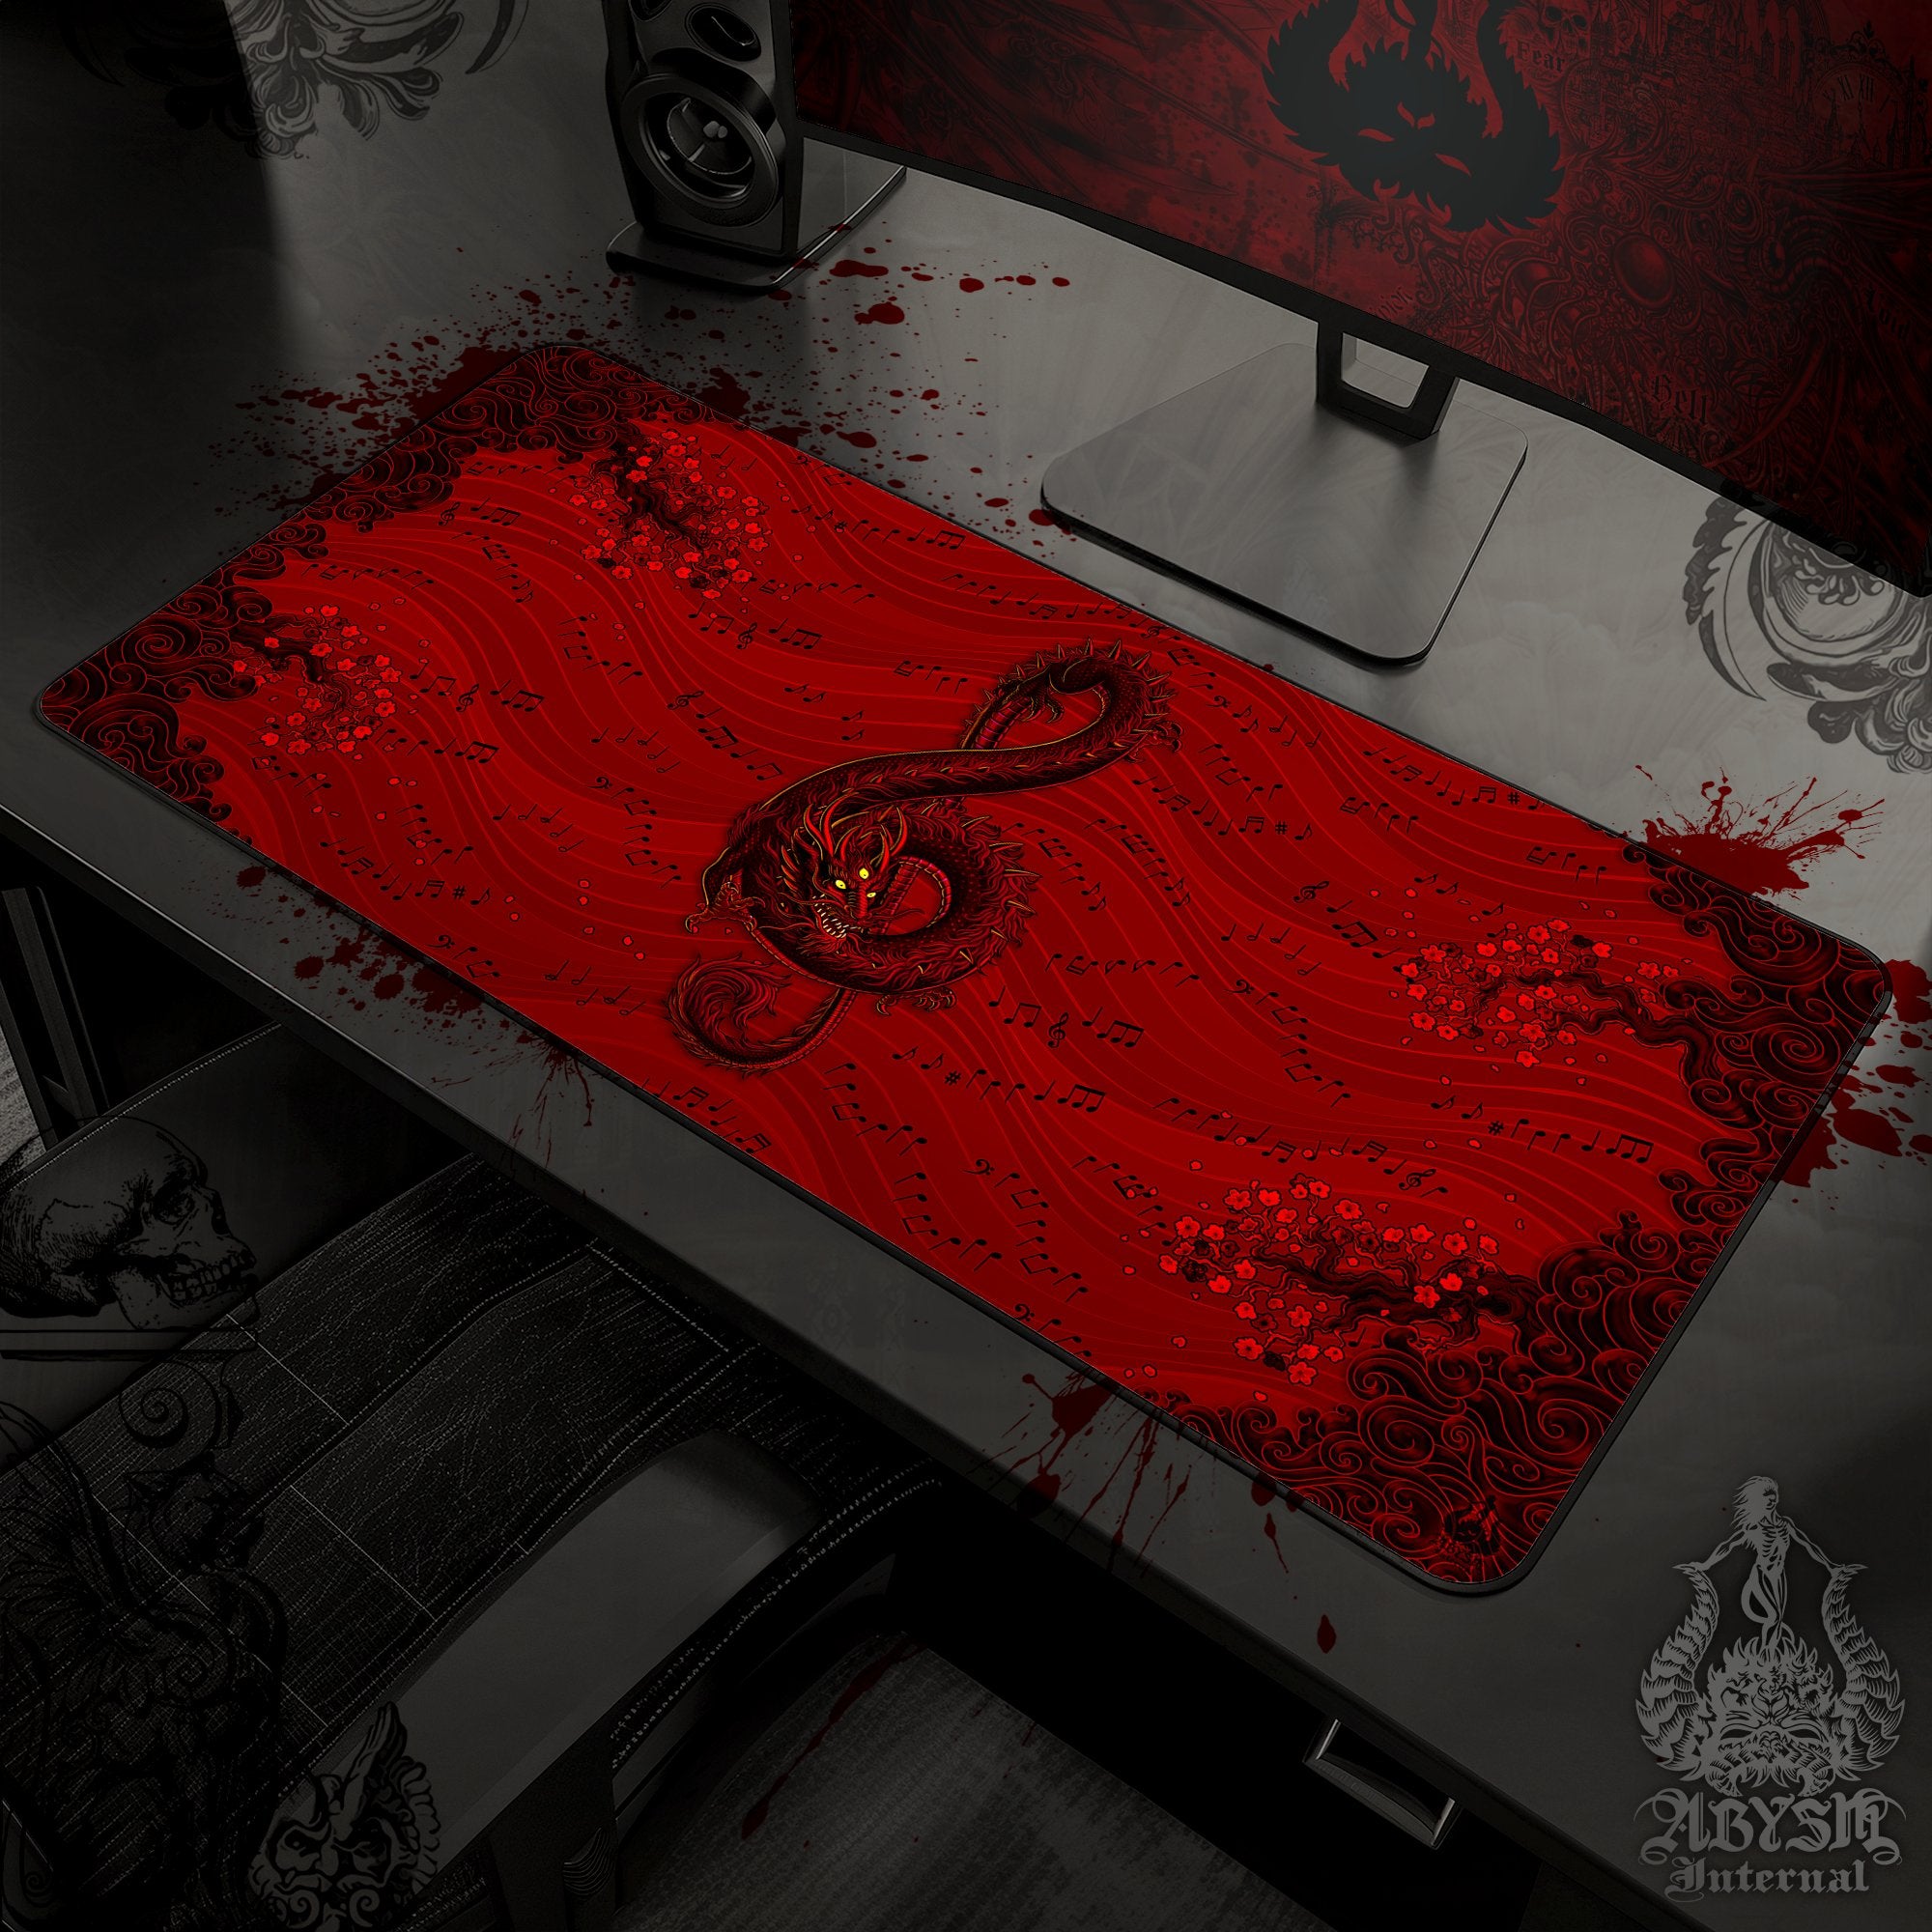 Music Desk Mat, Black Dragon Gaming Mouse Pad, Asian Table Protector Cover, Red Goth Workpad, Treble Clef Art Print - Demon - Abysm Internal